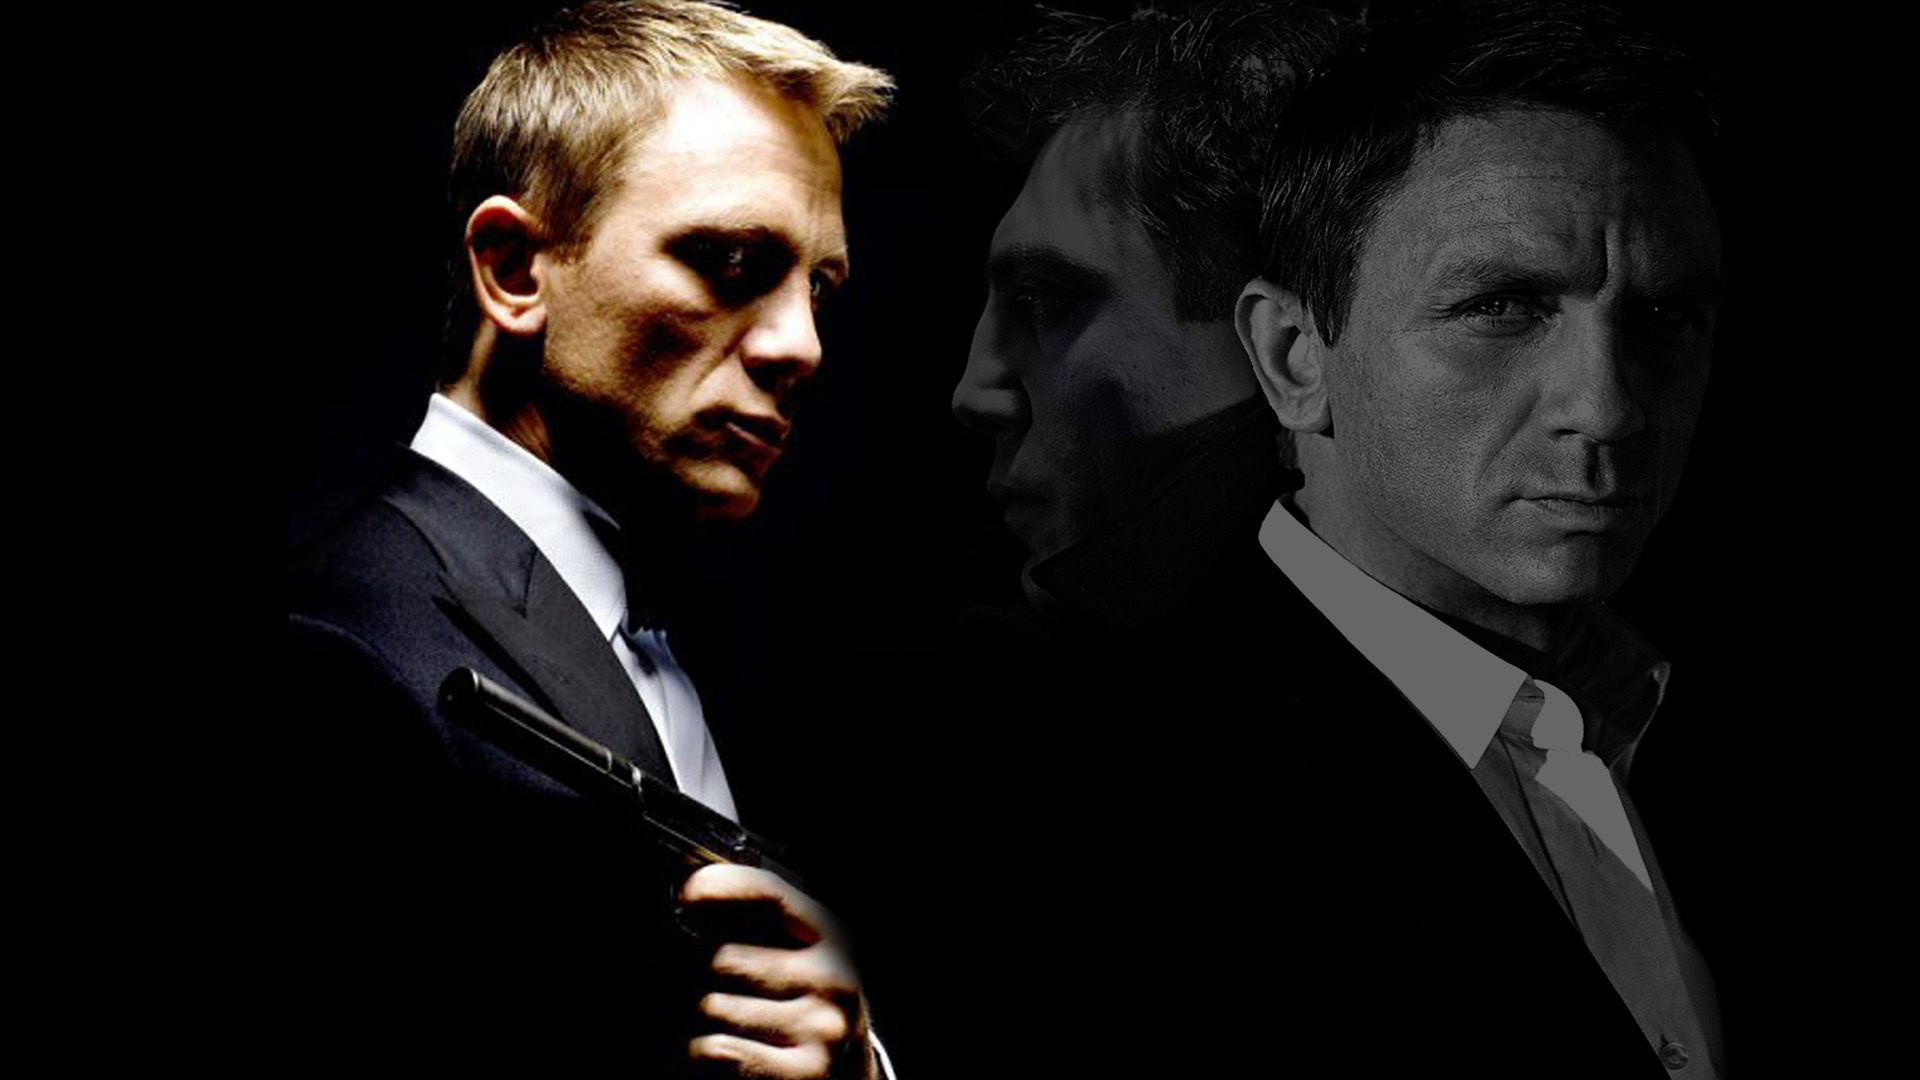 170+ Daniel Craig HD Wallpapers and Backgrounds